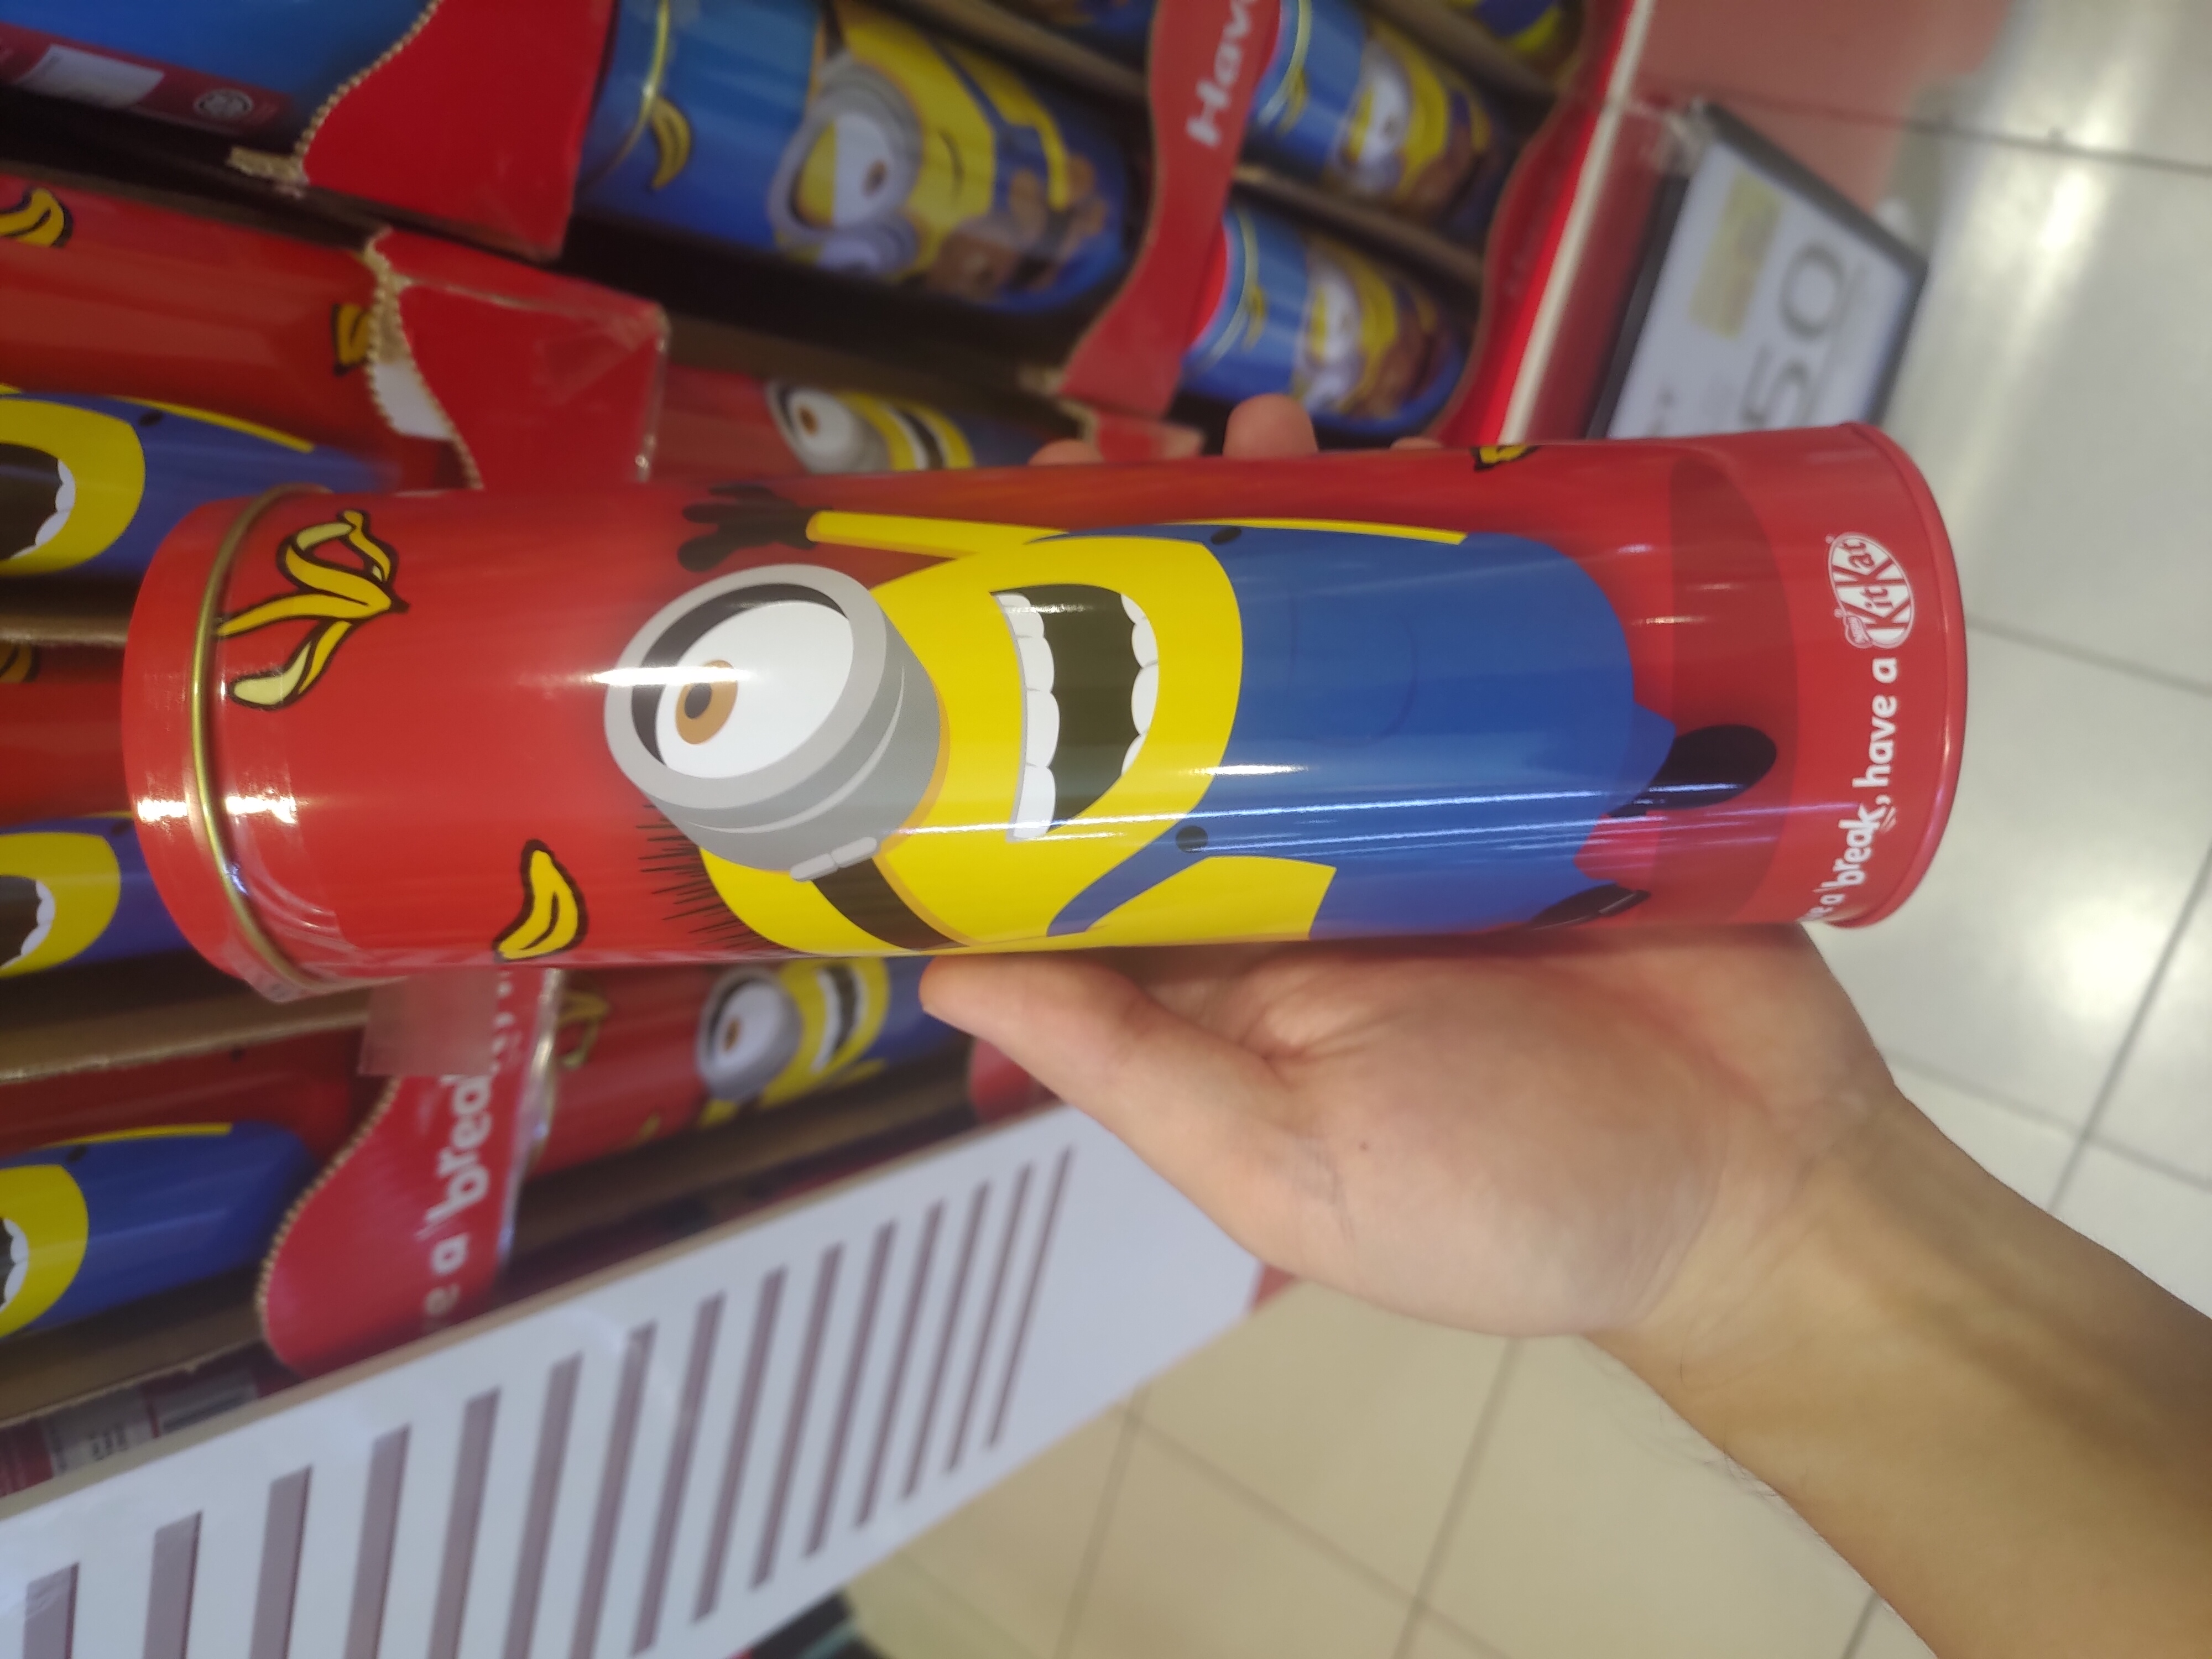 Free Limited Edition Minion Cooler Bag when you purchase Kit Kat at FairPrice - 12